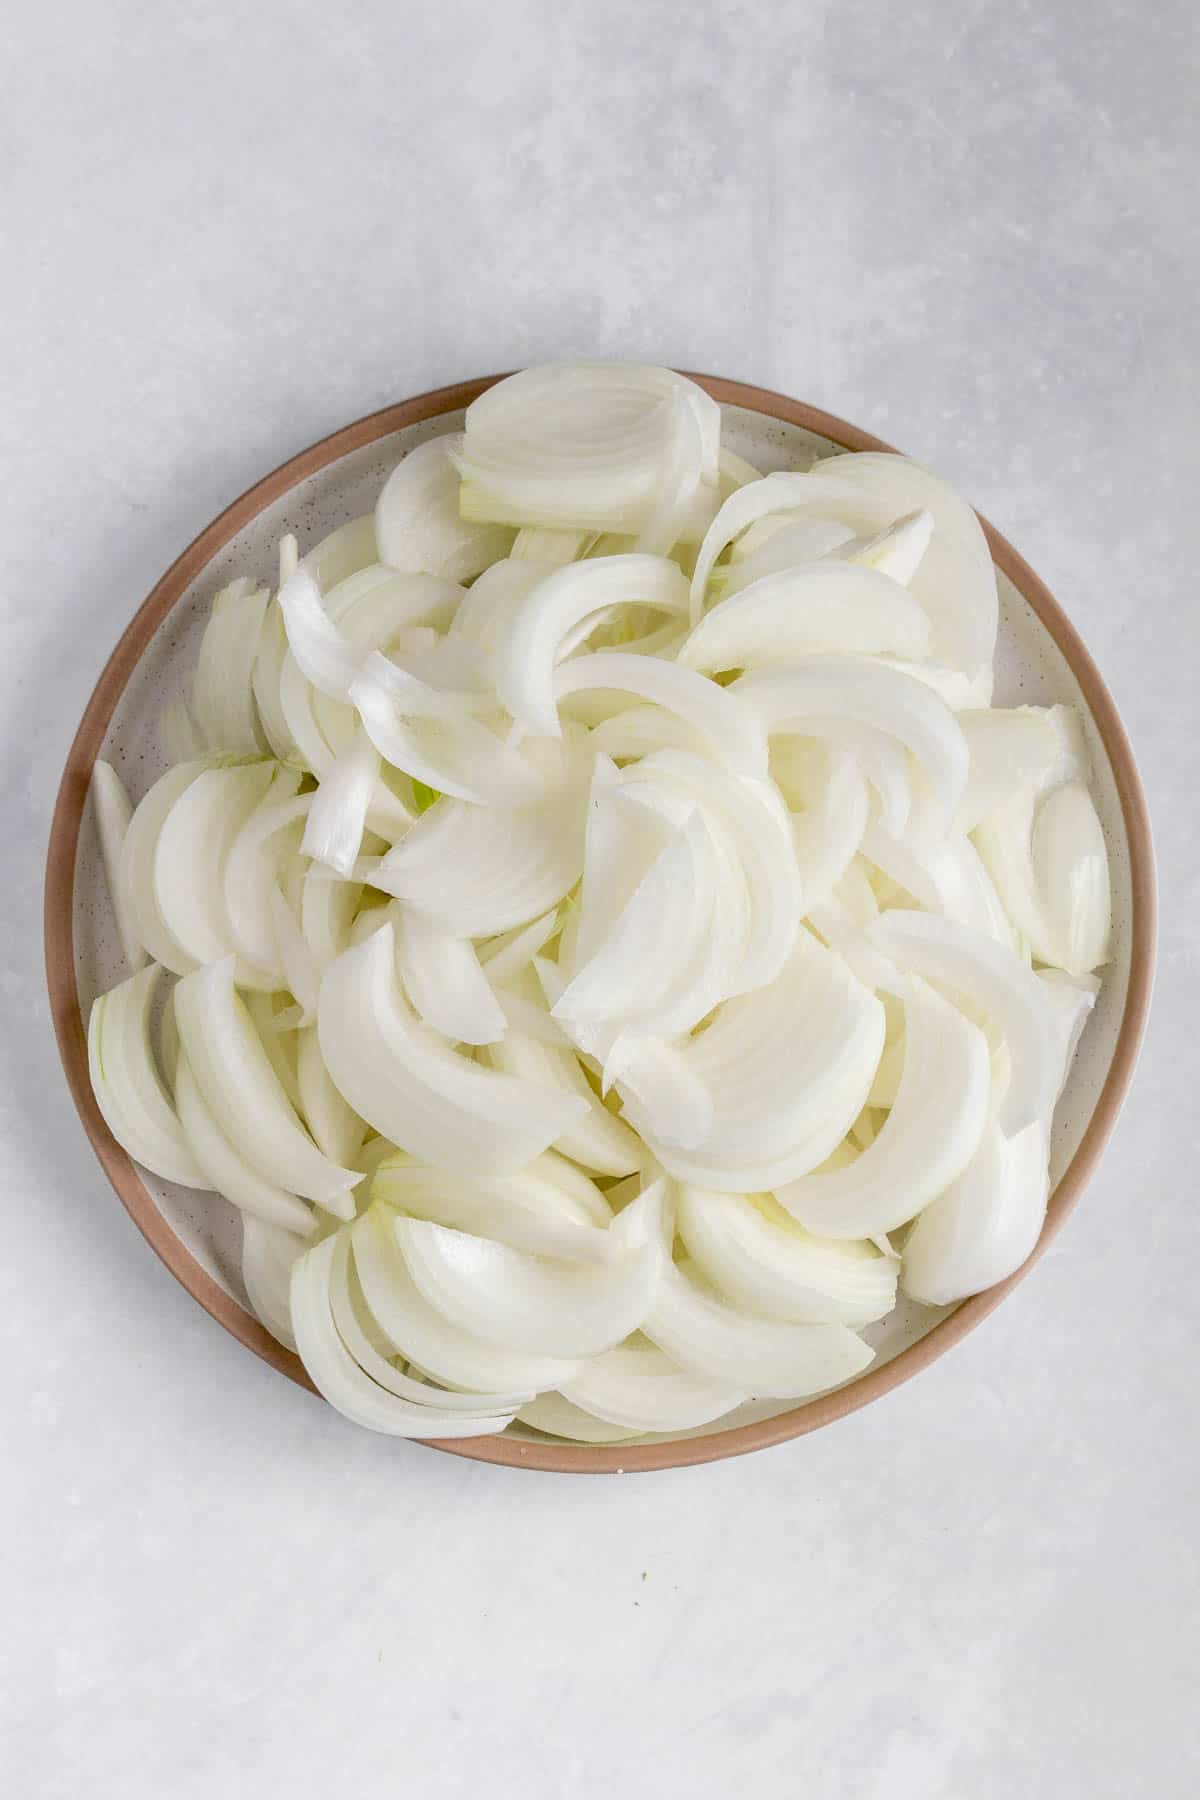 Sliced onions in a plate.